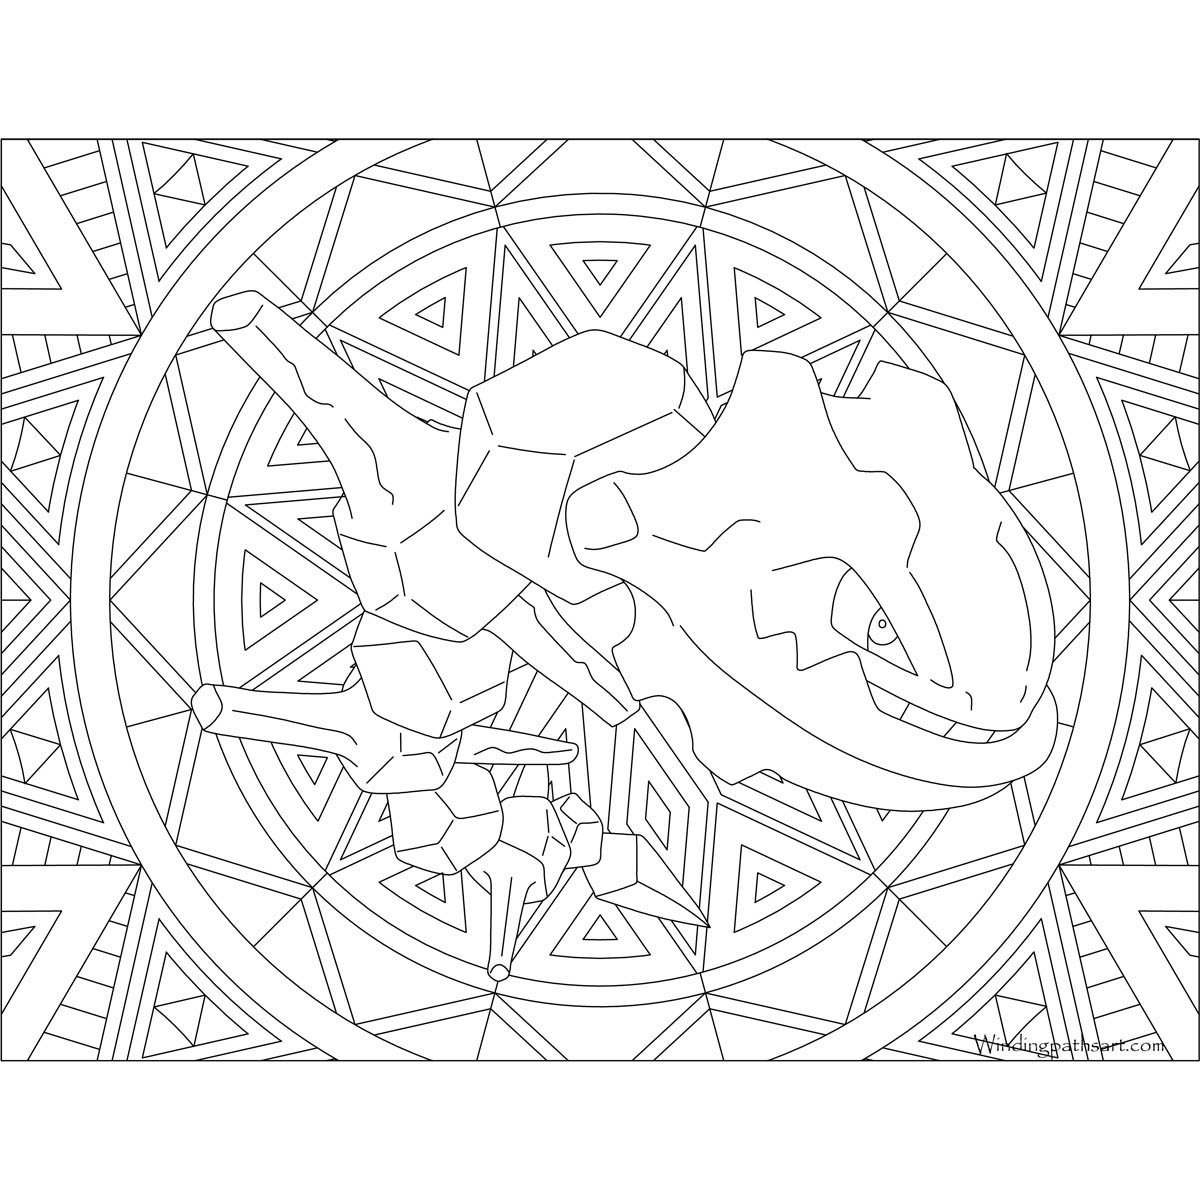 Free Steelix Pokemon Coloring Pages for Adults printable